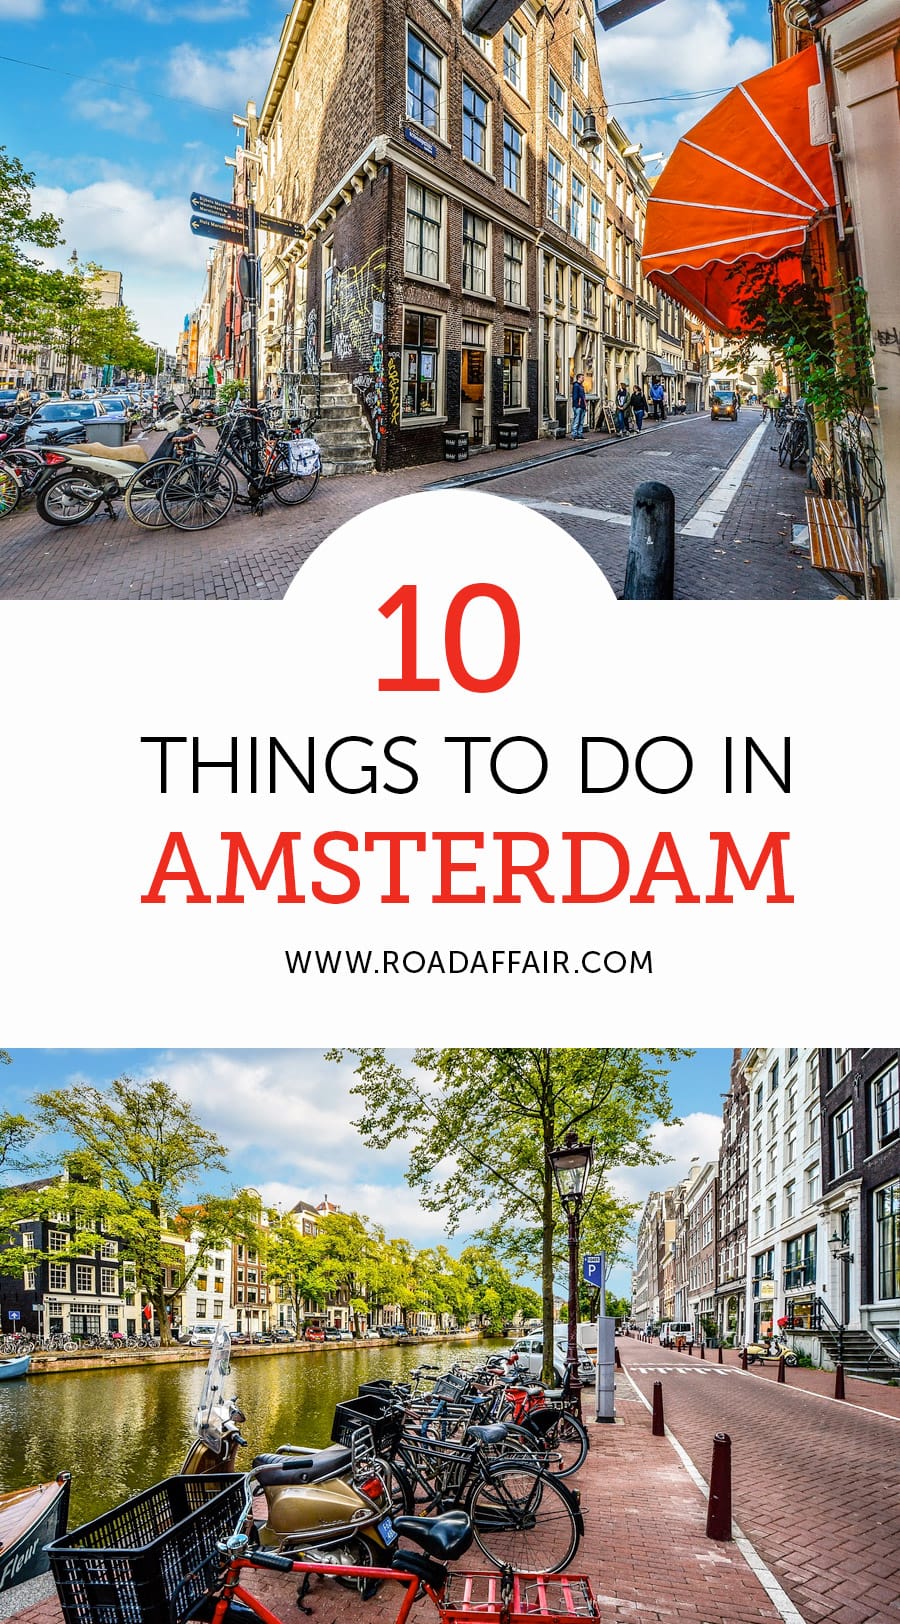 Best Things to Do in Amsterdam, Netherlands